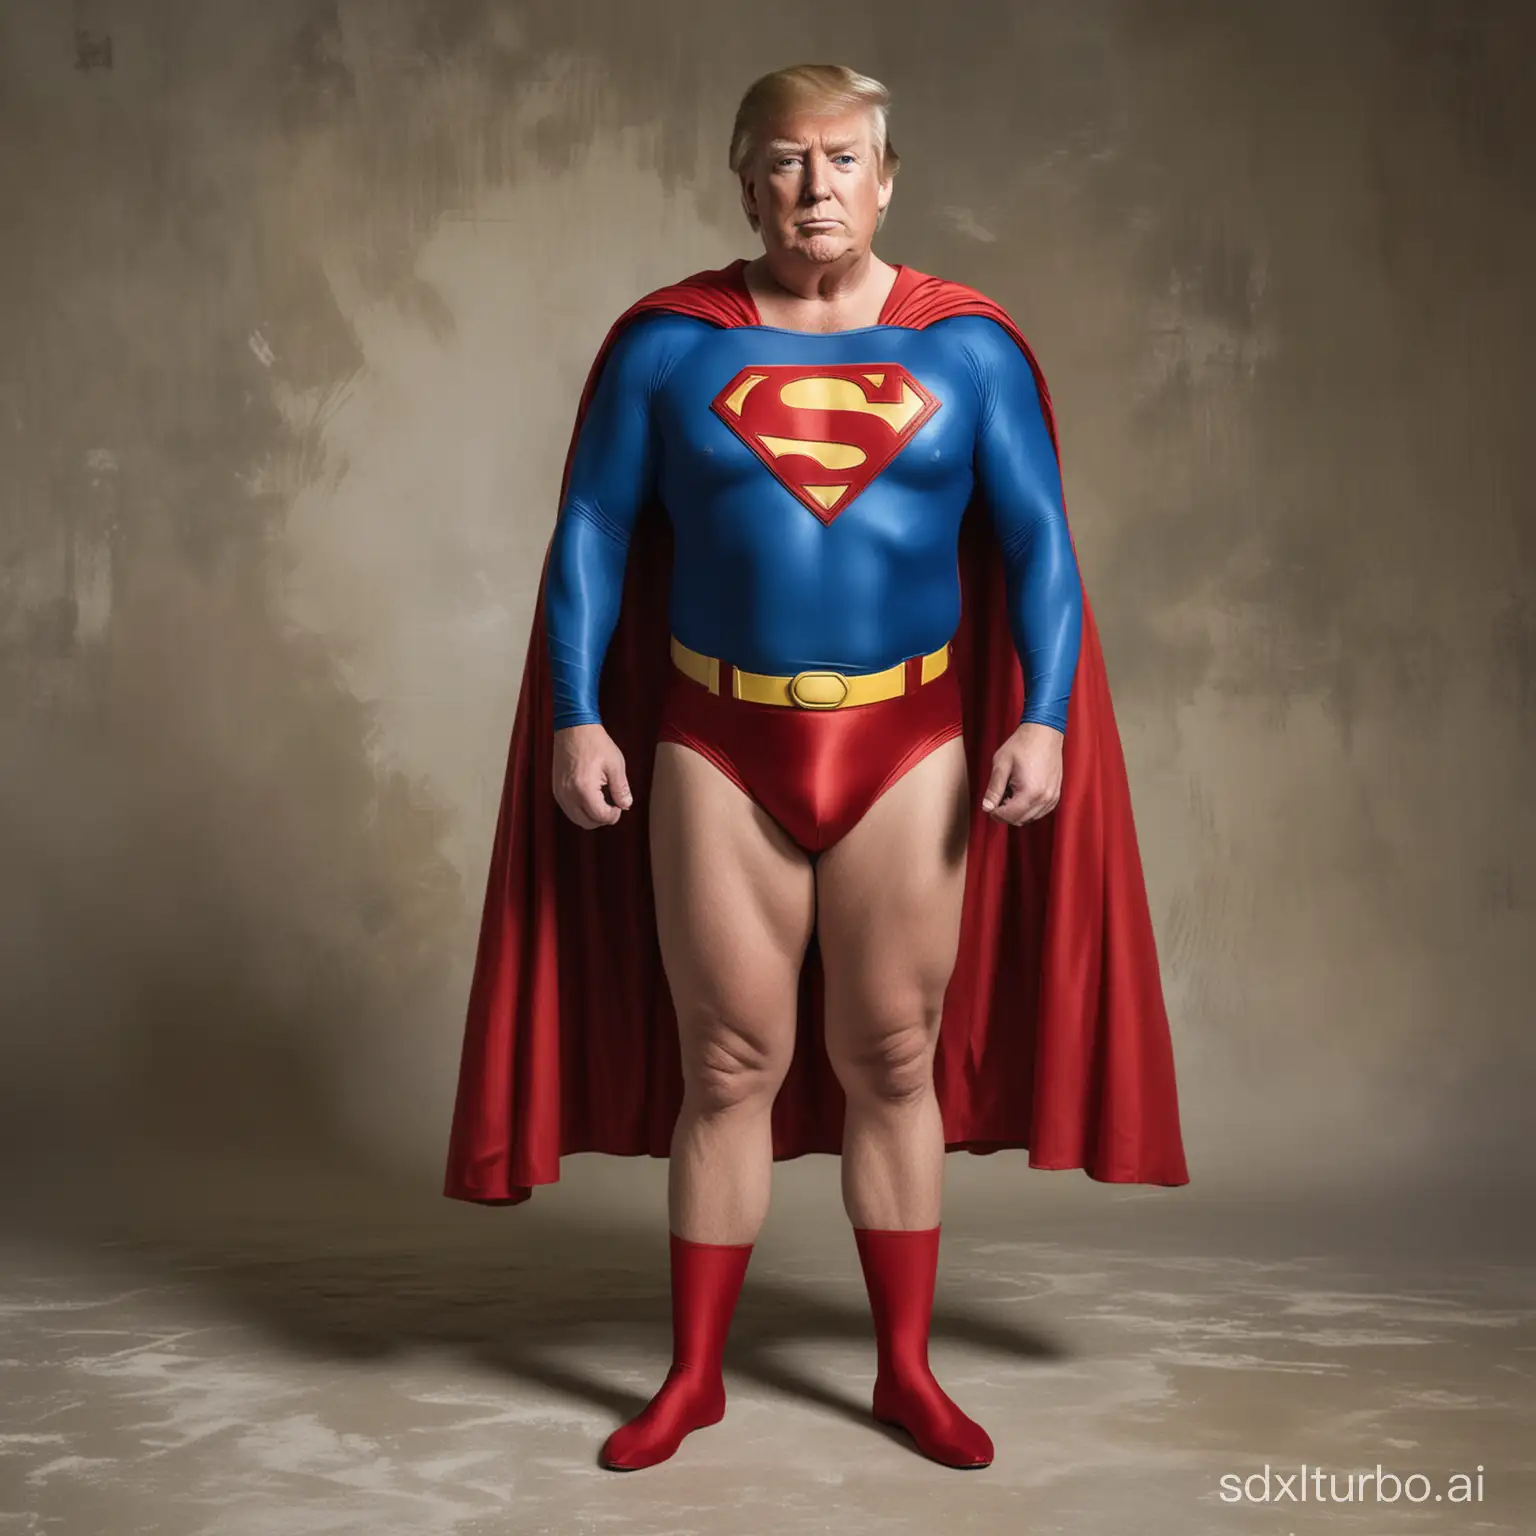 Trump-Cosplaying-as-Superman-in-Bold-Costume